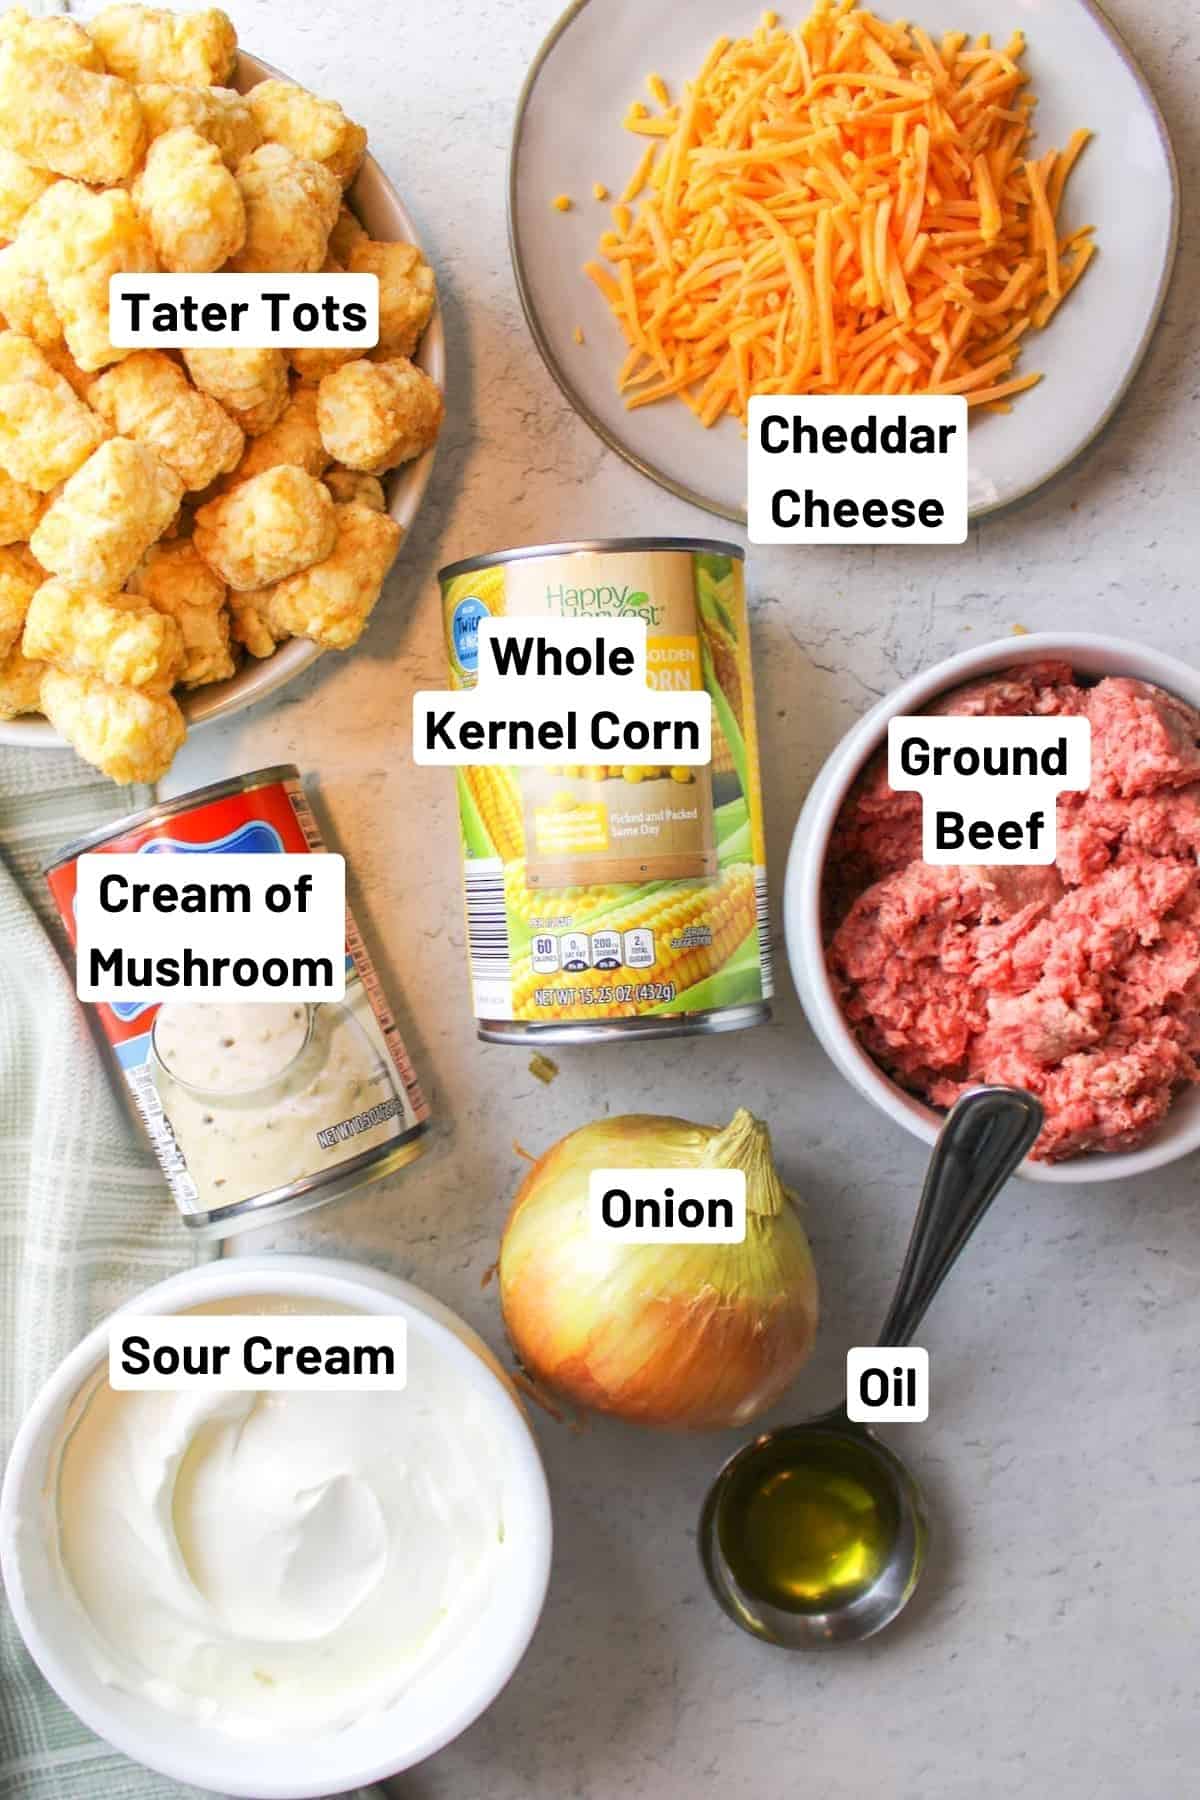 the ingredients needed to make tater tot casserole hotdish